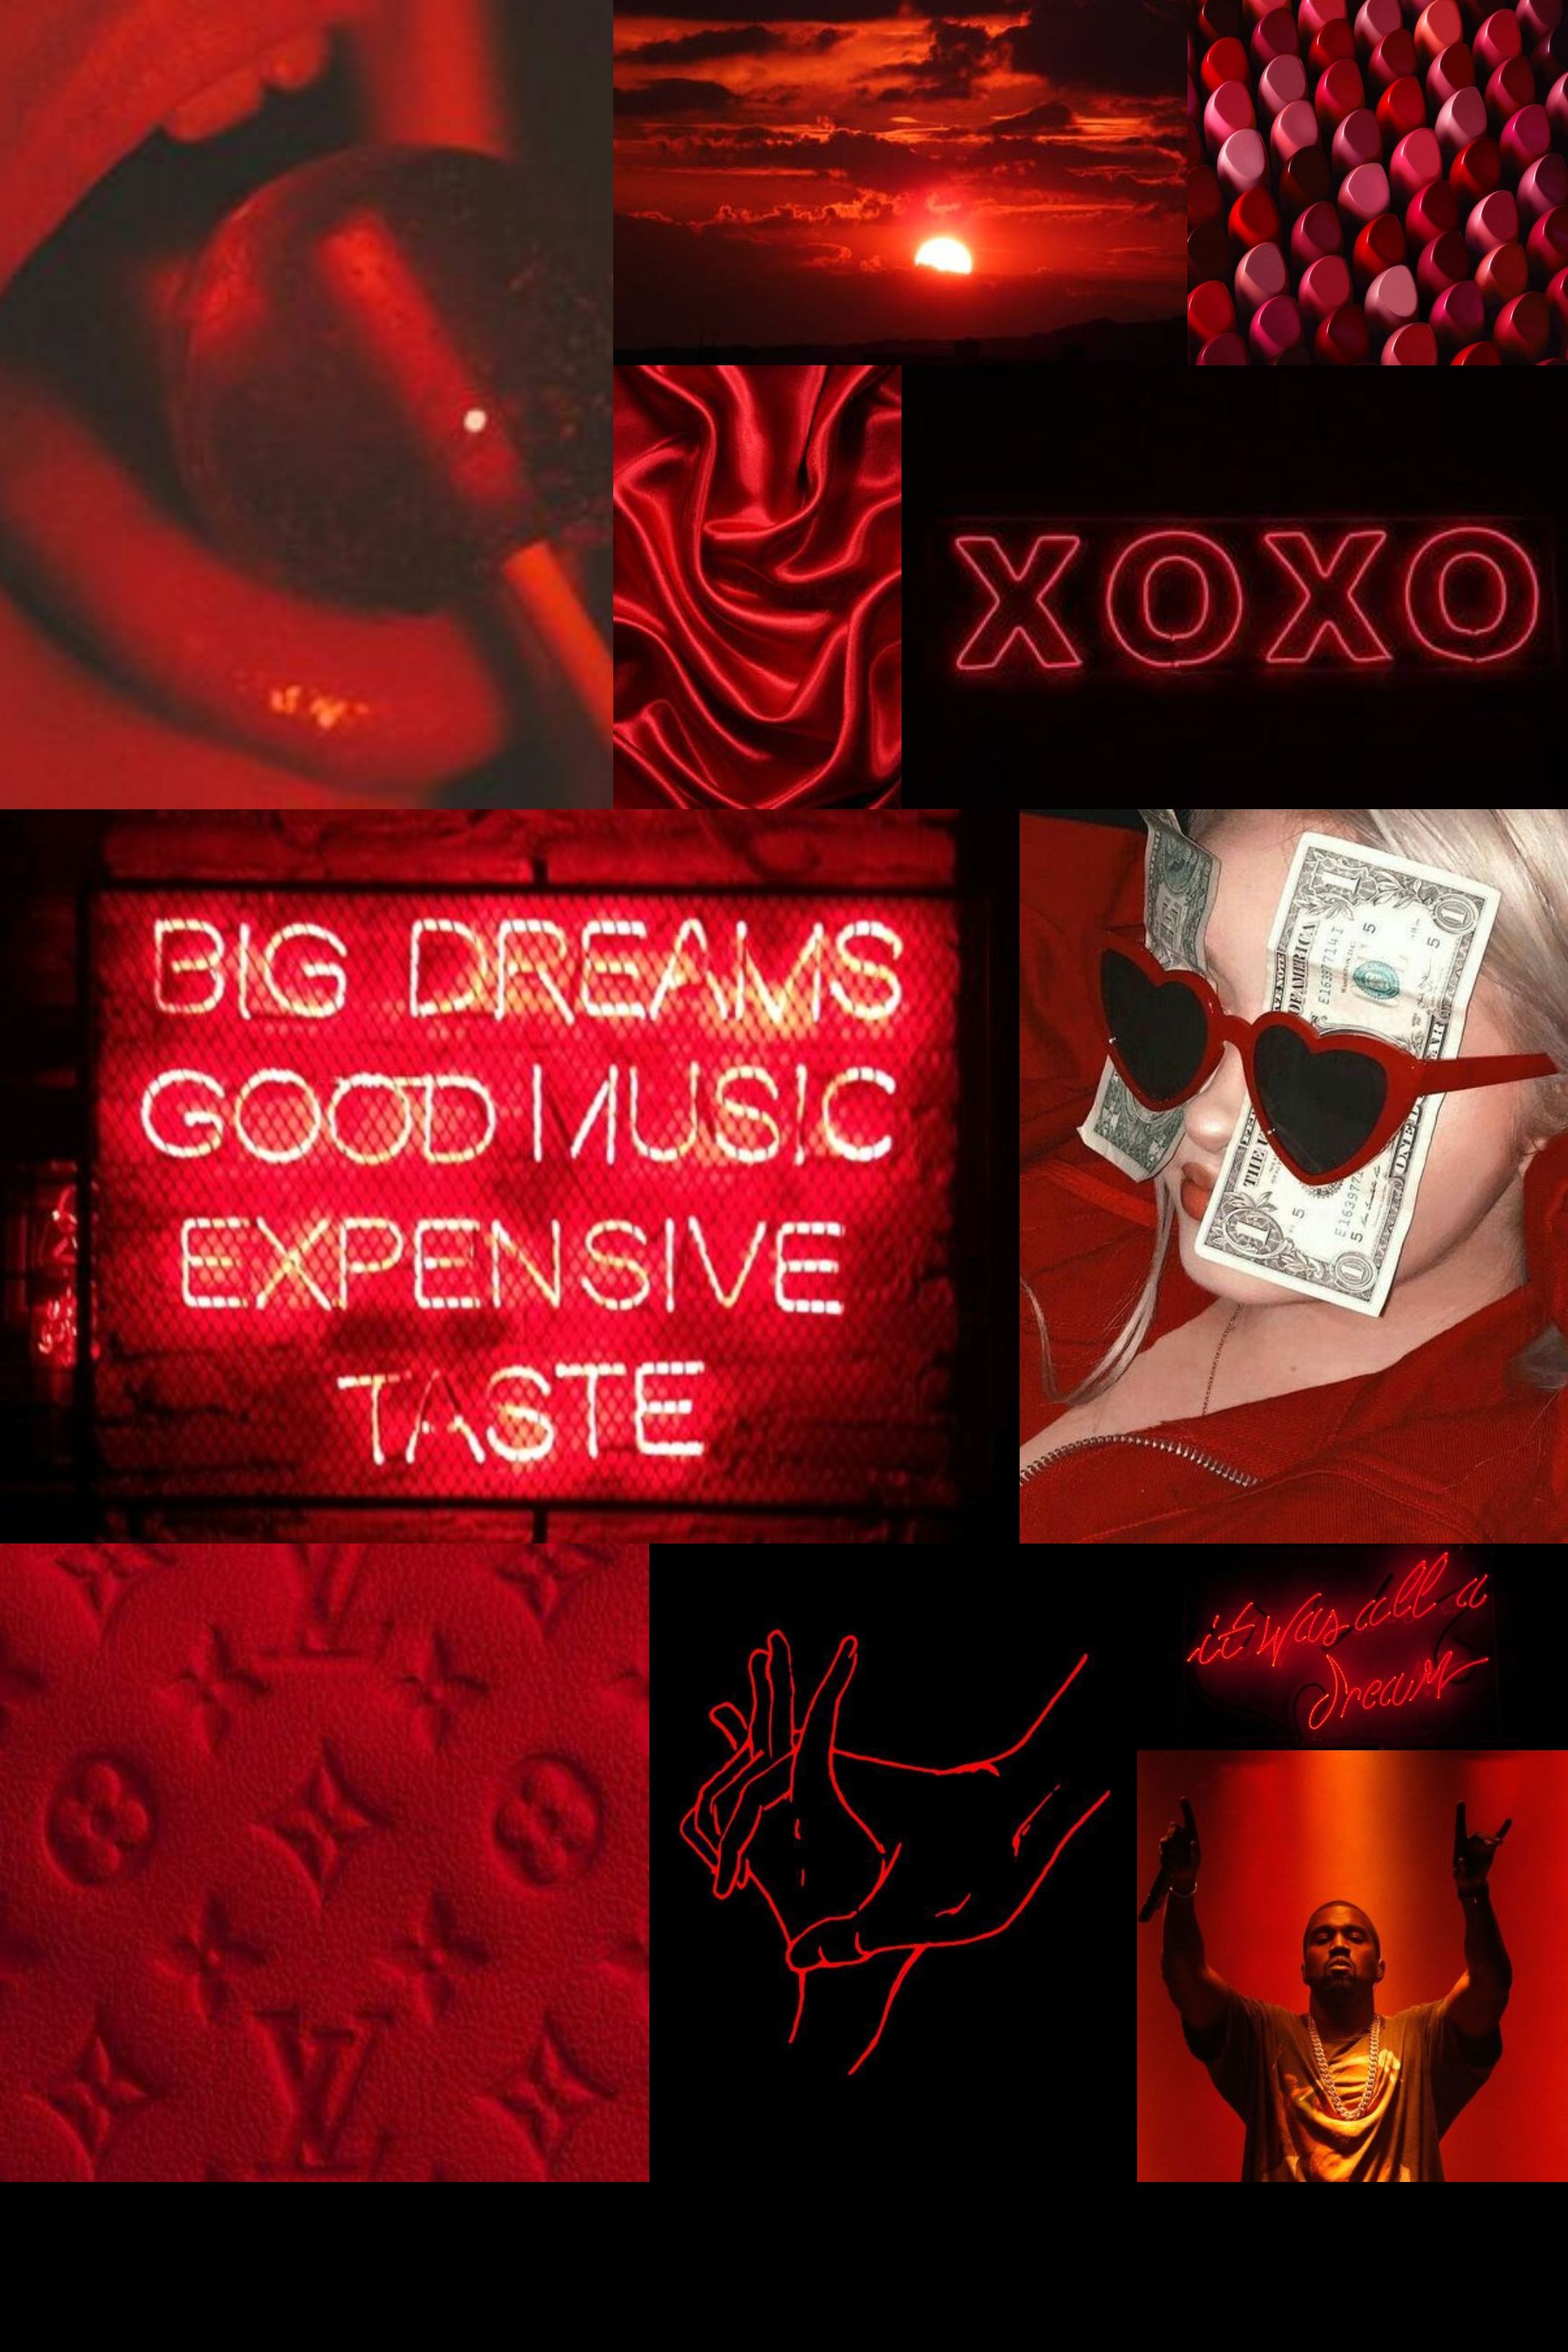 Dark Red mood board aesthetic collage wallpaper. Dark red wallpaper, Wallpaper iphone neon, Red colour wallpaper